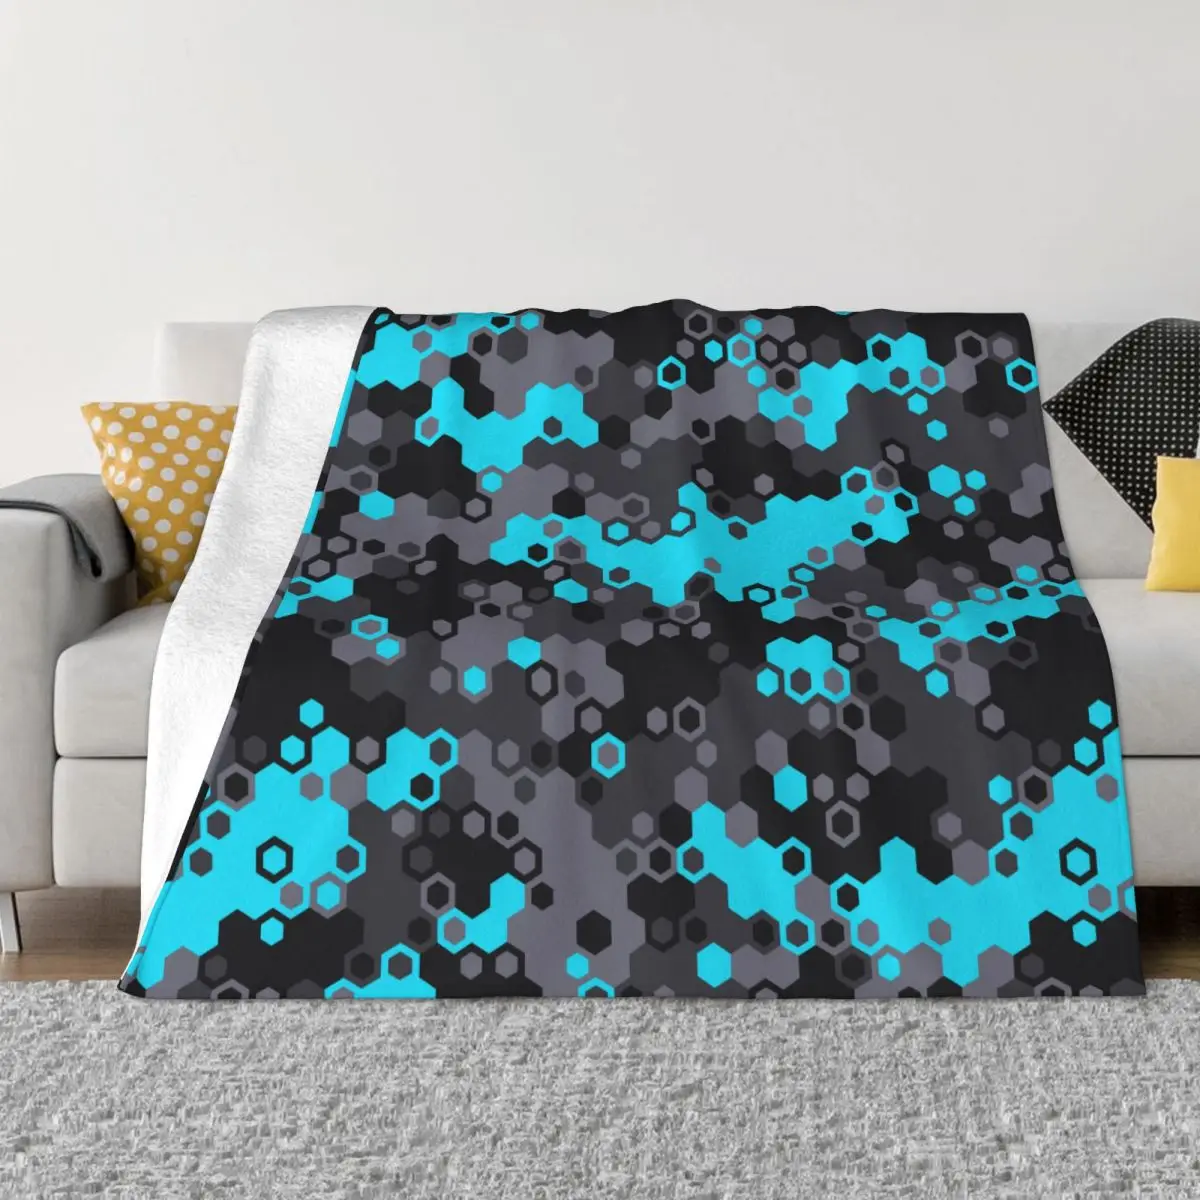 

Hexagonal Camouflage Blankets Coral Fleece Print Geometric Military Endless Camo Soft Throw Blankets for Home Couch Rug Piece